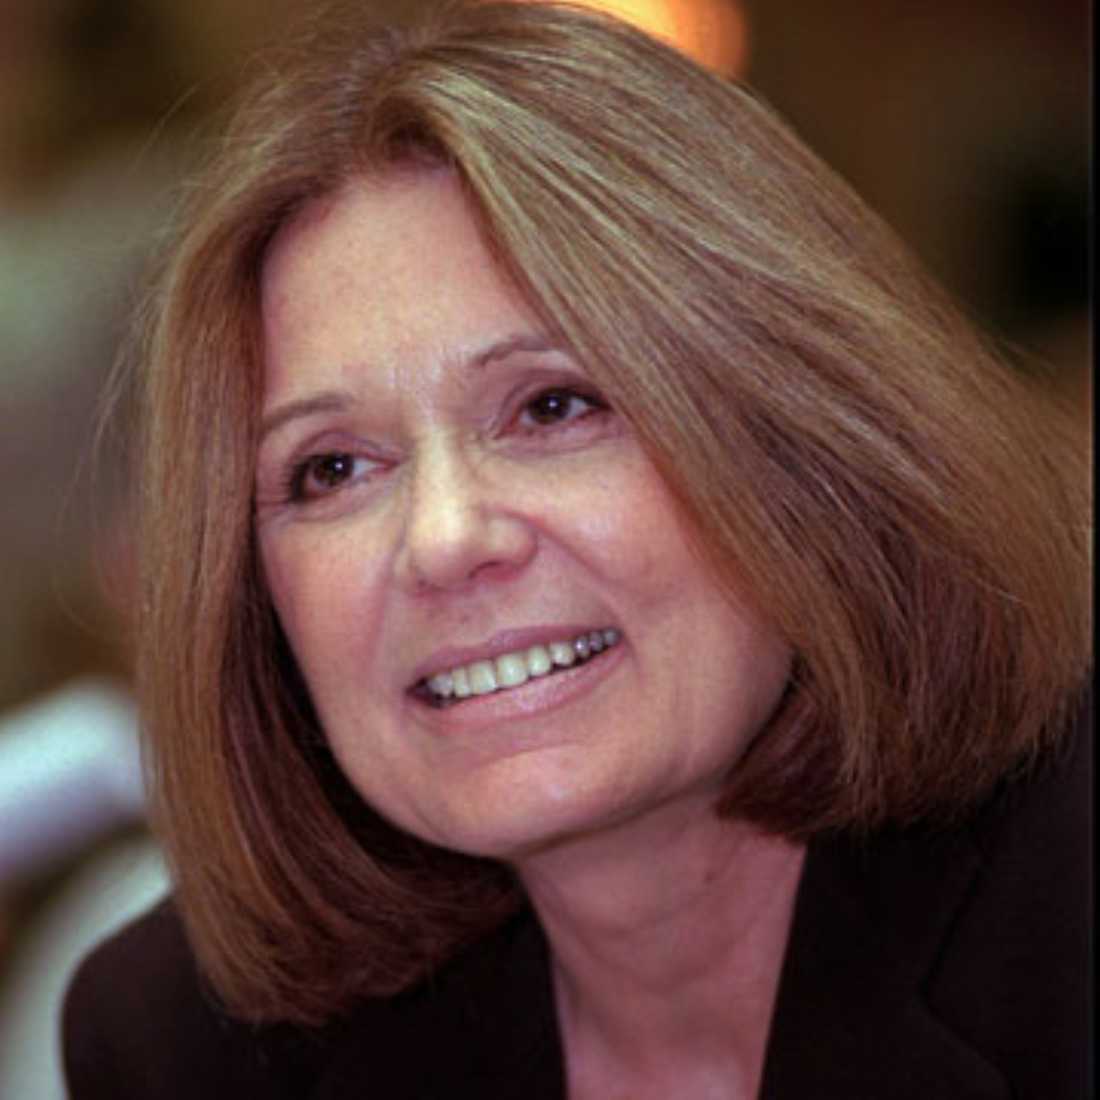 Gloria Steinem: “Reproductive freedom is at least as fundamental as freedom of speech.”